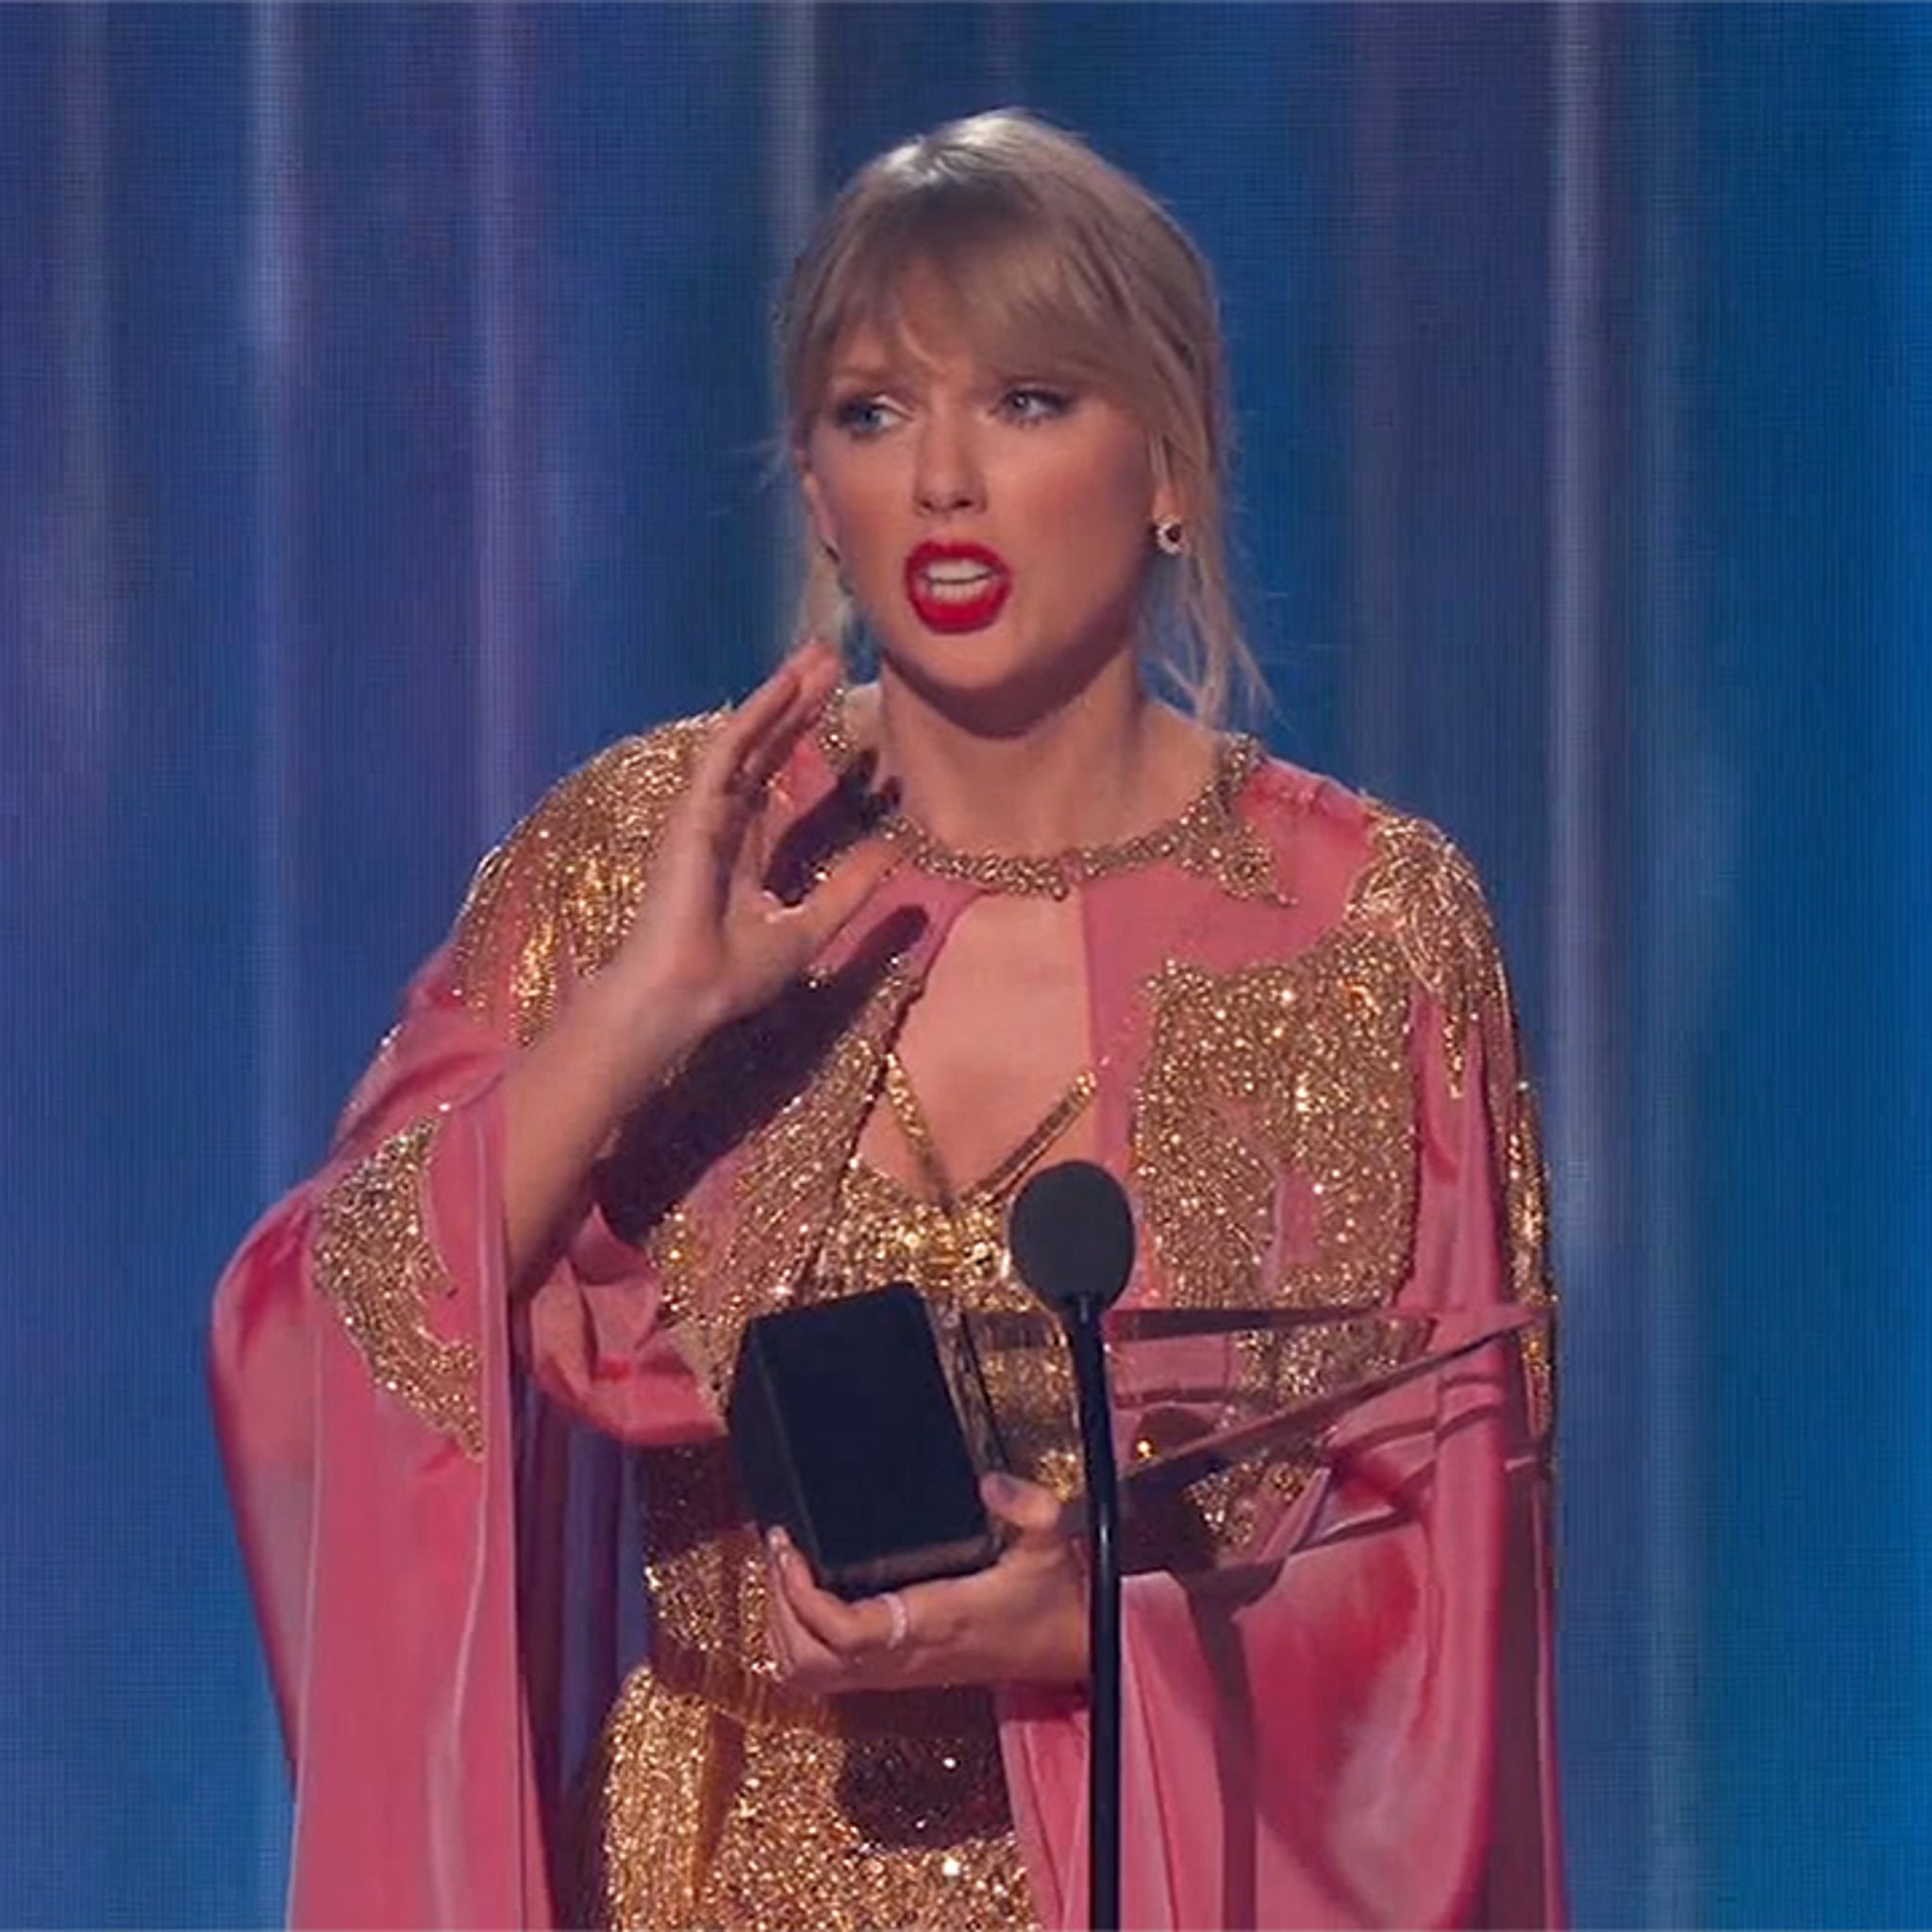 Taylor Swift Accepts Ama No Direct Mention Of Scooter Braun